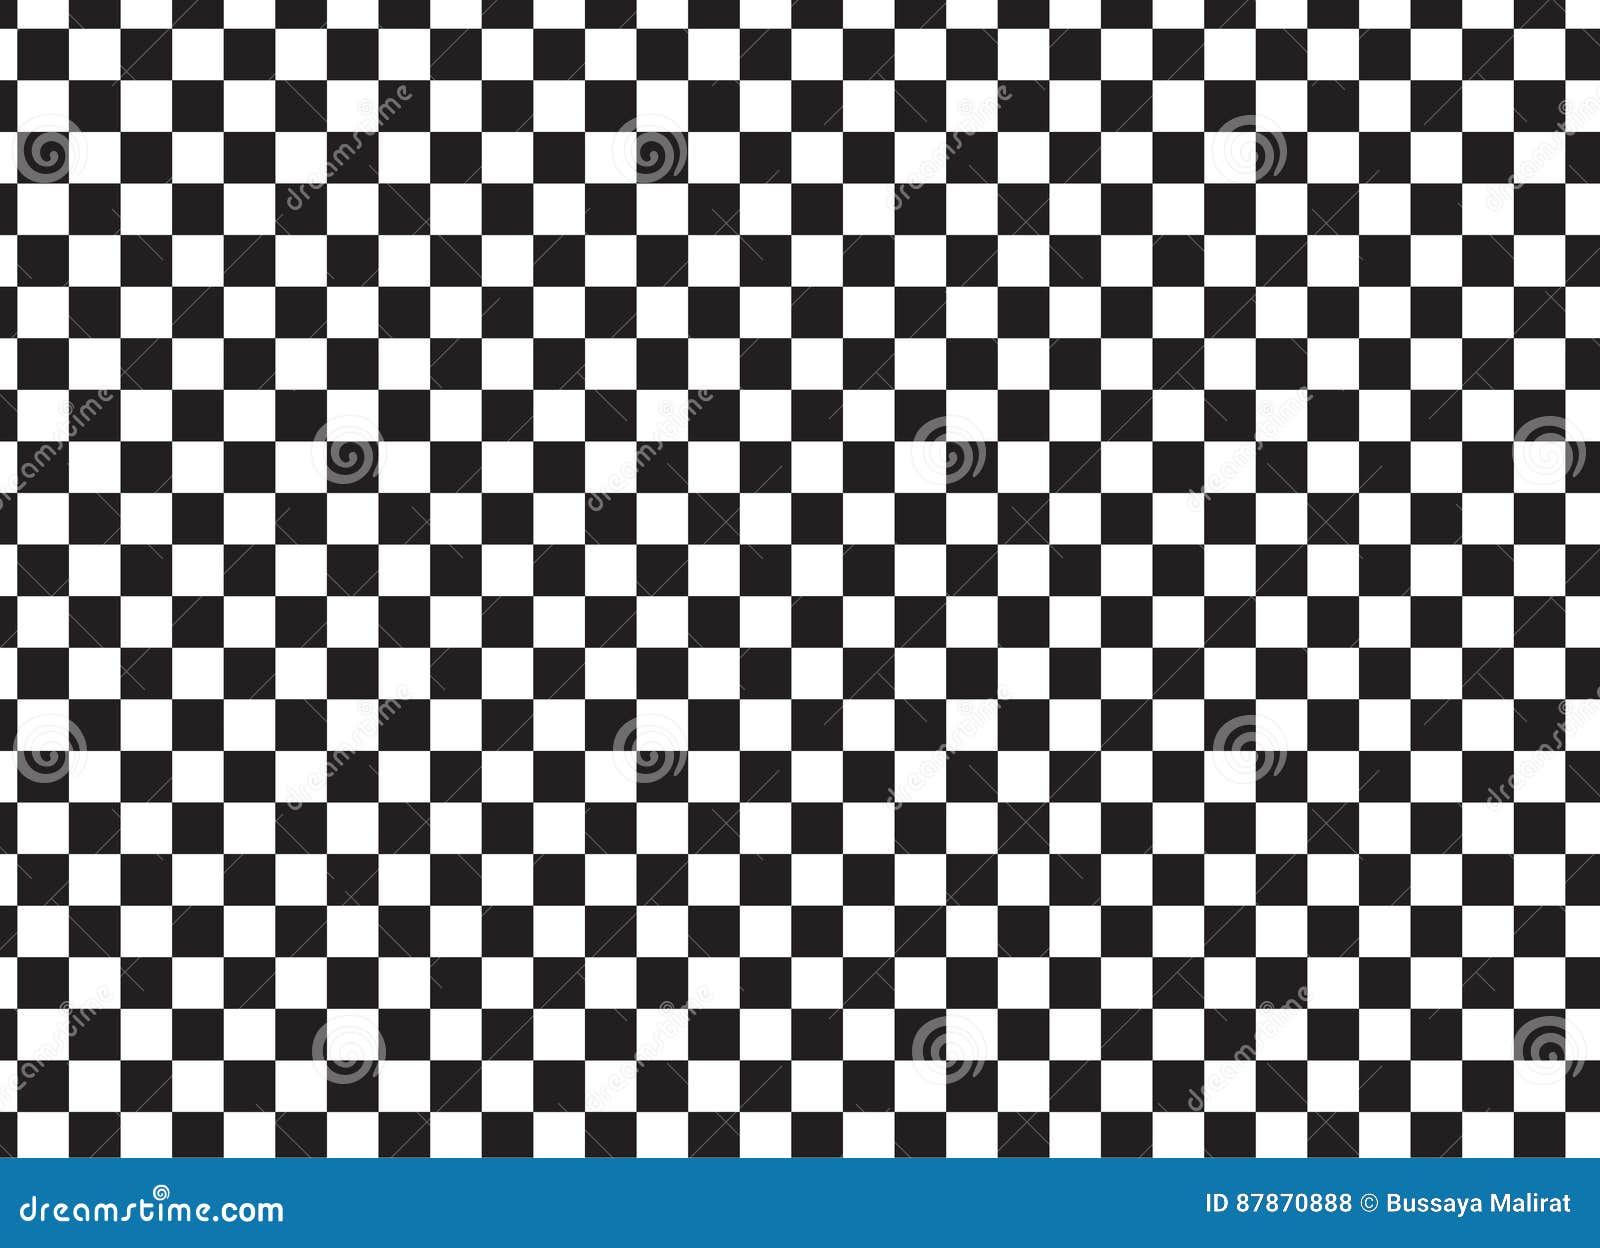 Black And White Racing And Checkered Pattern Stock Vector